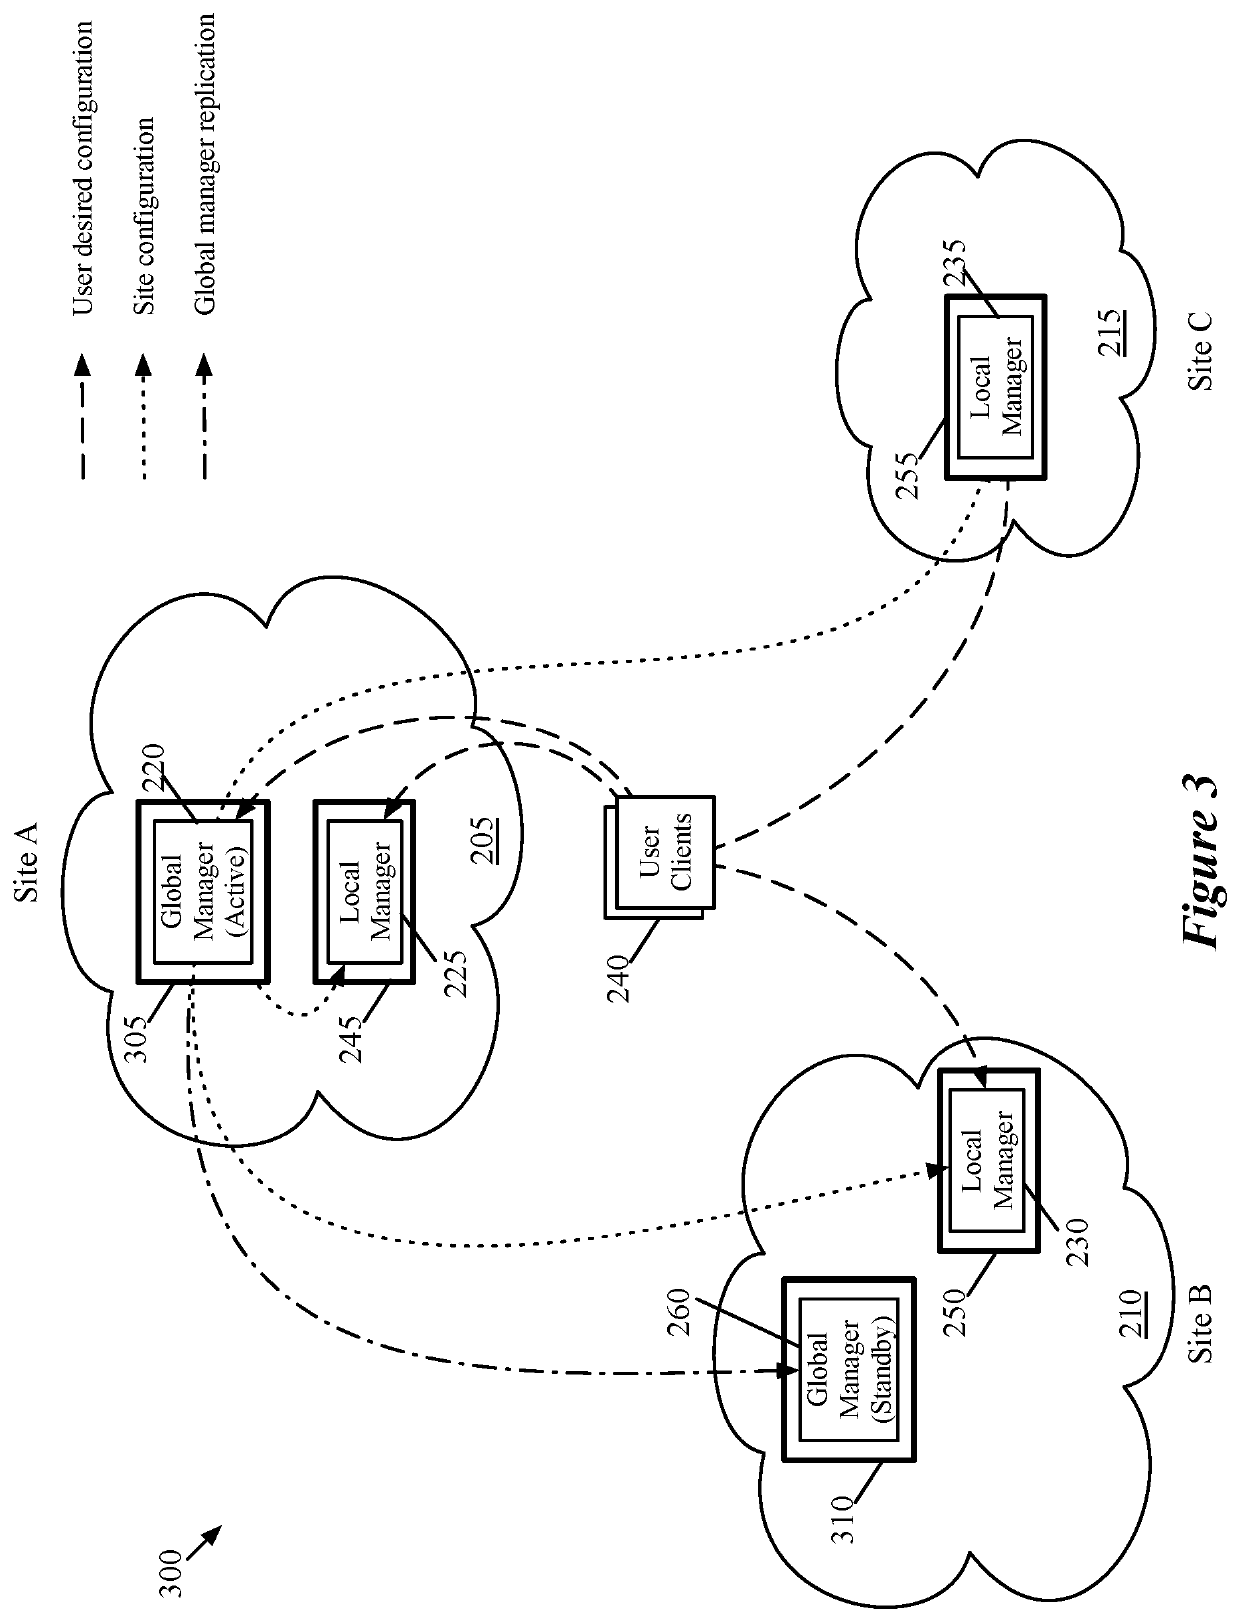 Network controller for multi-site logical network